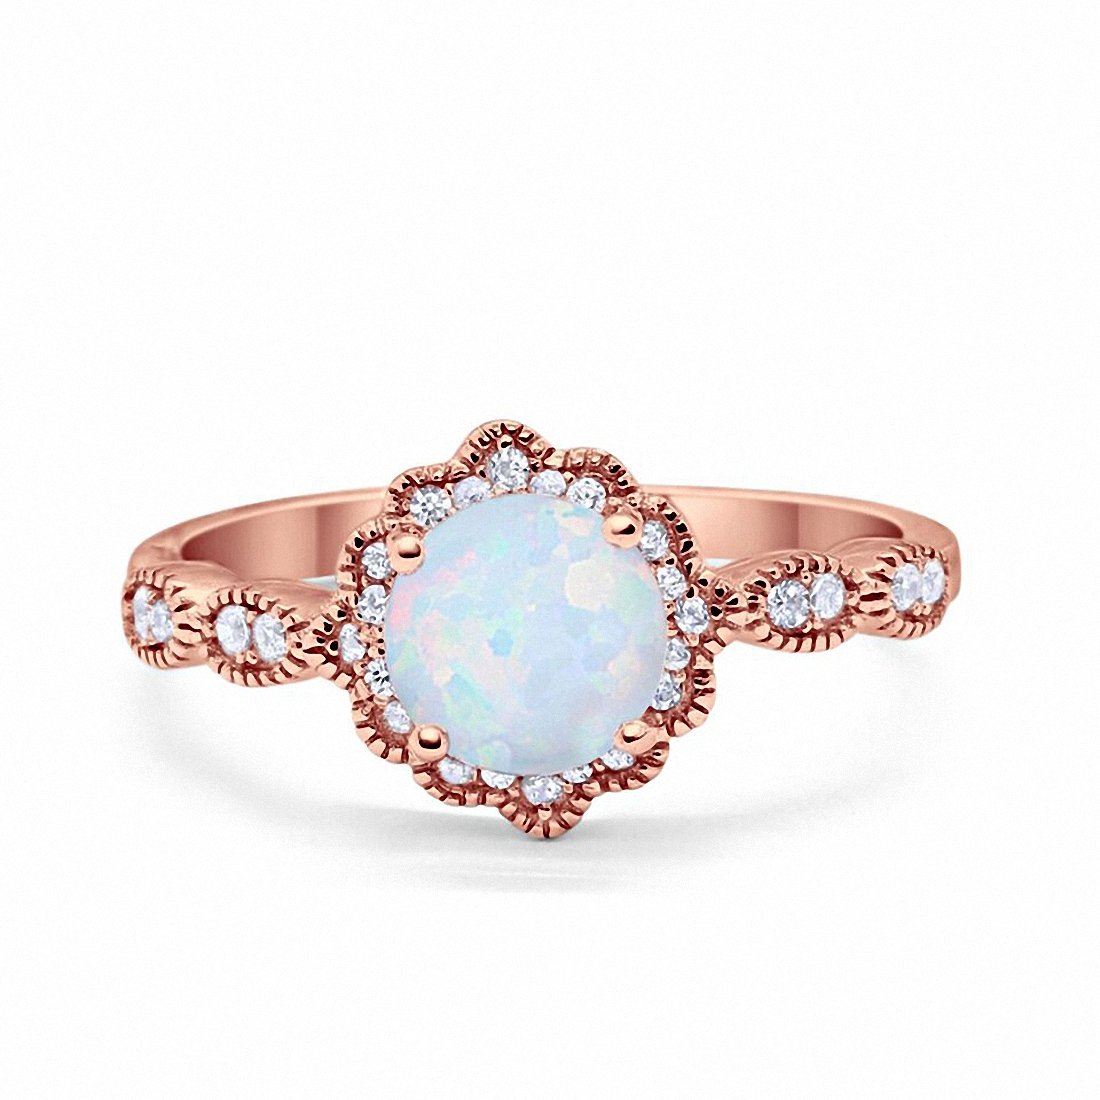 Floral Art Engagement Ring Rose Tone, Lab Created White Opal 925 Sterling Silver